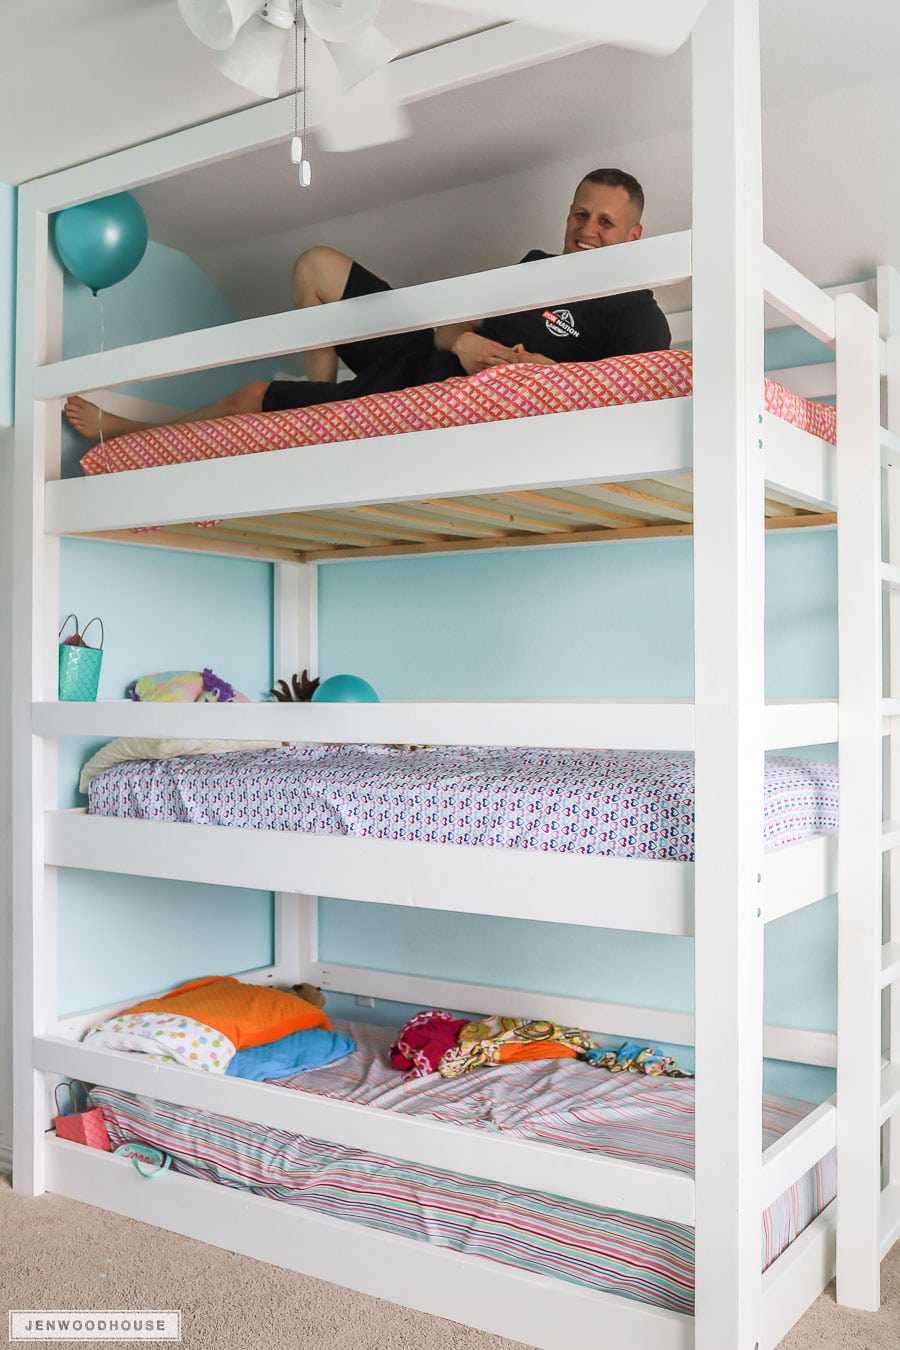 How To Build A Diy Triple Bunk Bed, How To Build A Triple Bunk Bed Loft